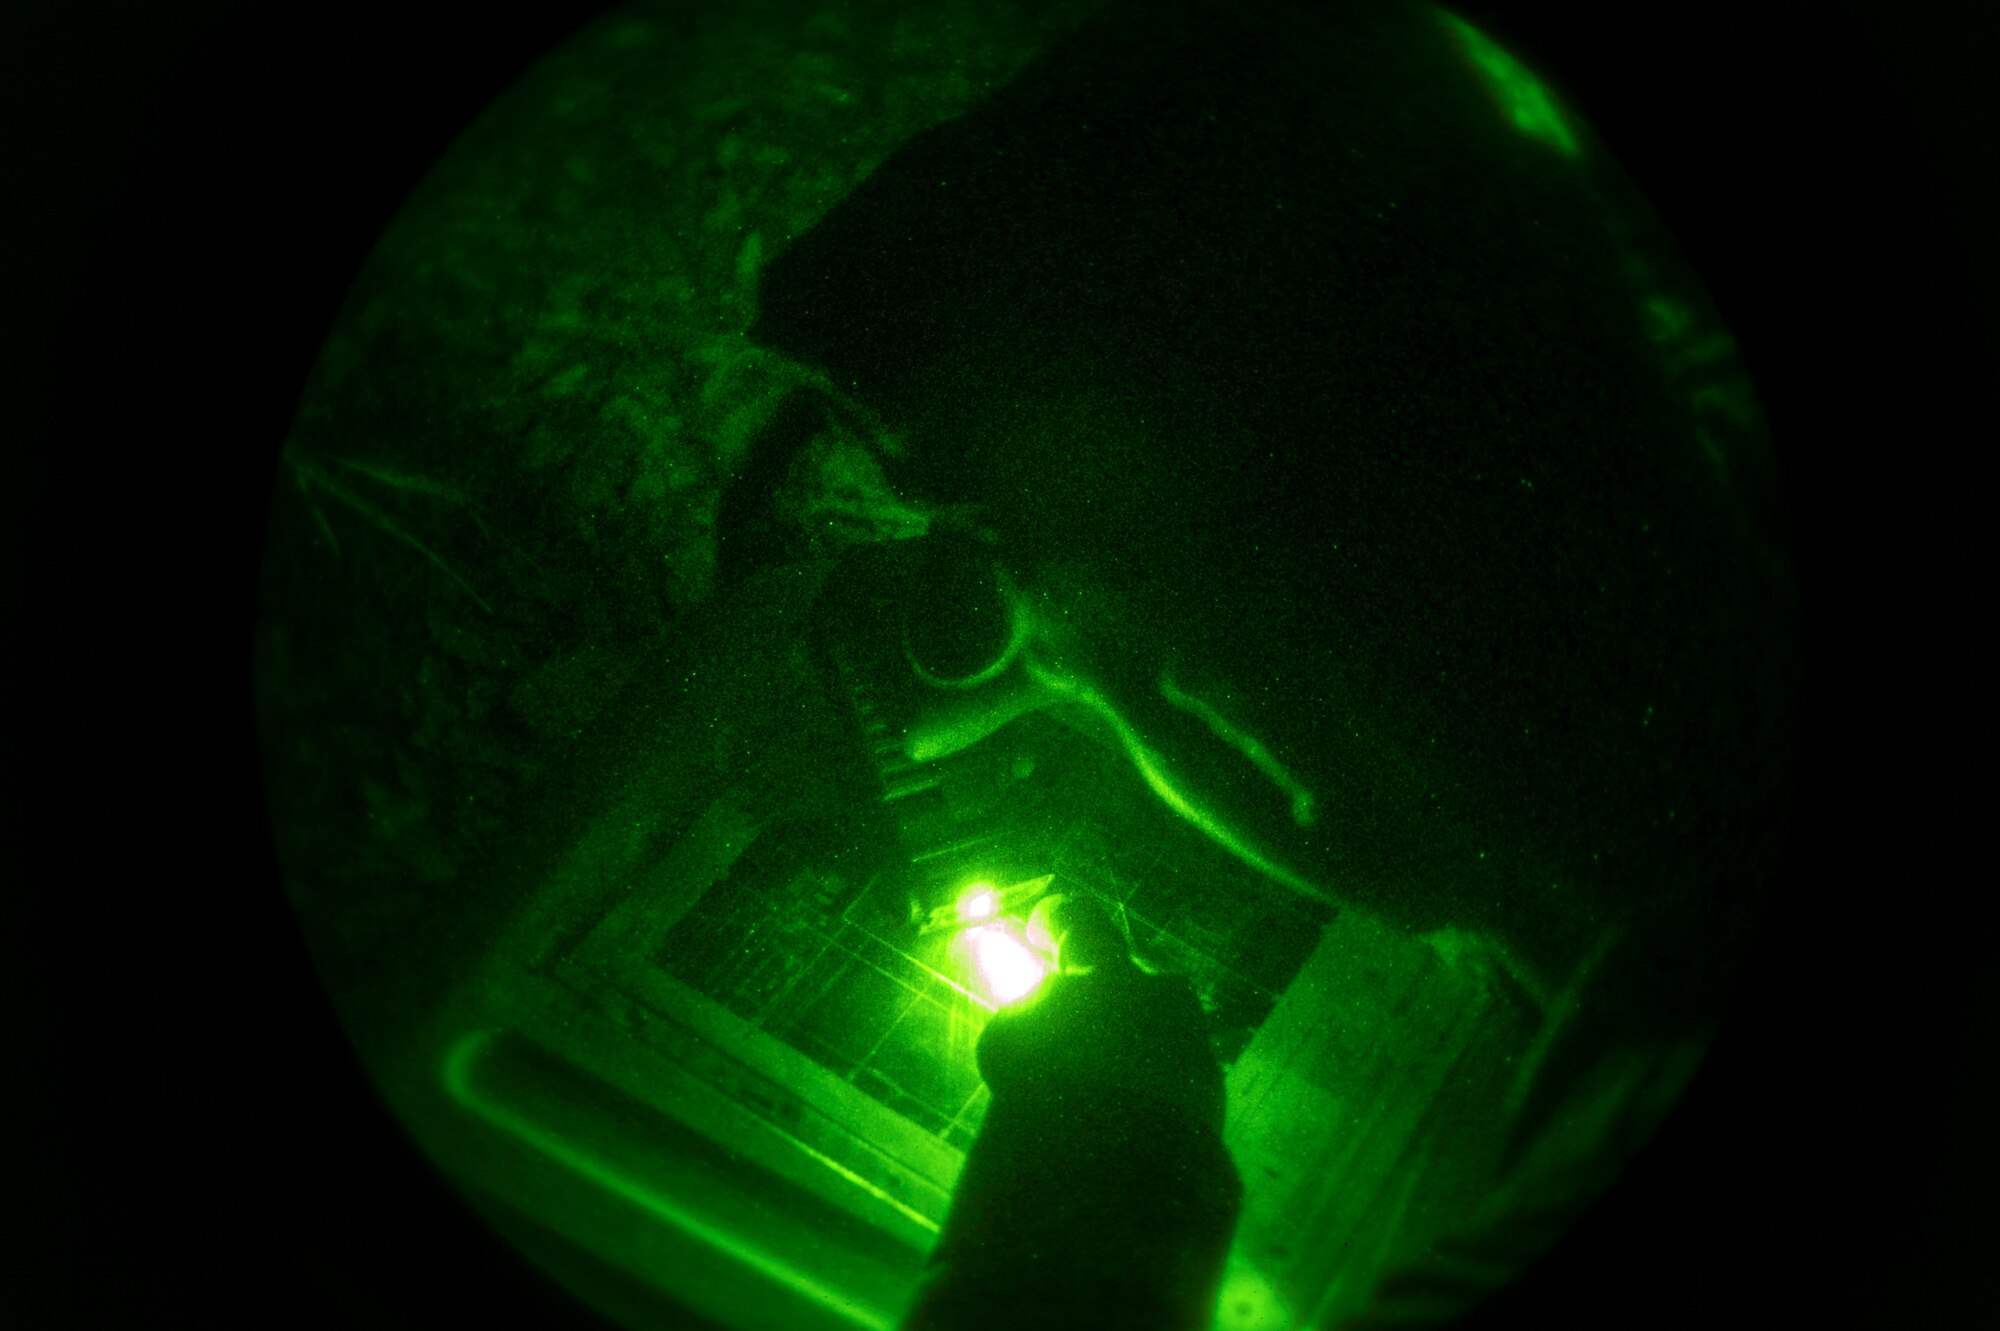 A U.S. Marine reviews a map during a night patrol as part of a U.S. Marine Corps Forces Central Command noncommissioned officer (NCO) field exercise at MacDill Air Force Base, Fla., March 14-15, 2018. The night patrol was an opportunity for Marine NCO’s to hone their basic Marine Corps skills in a field environment, while building camaraderie.